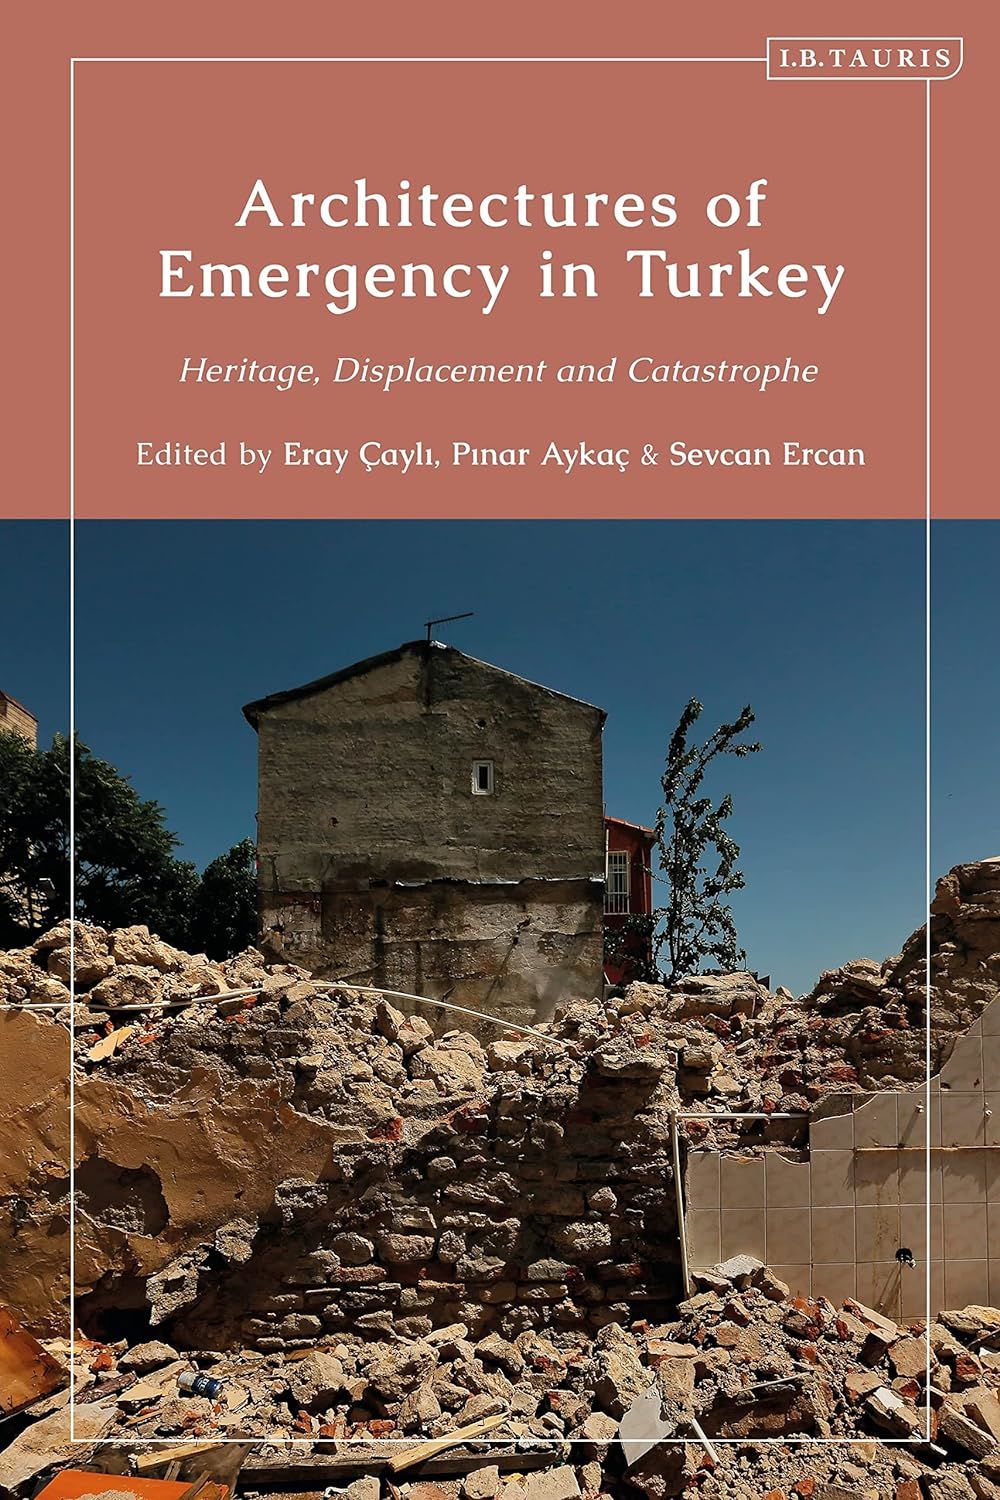 Architectures of Emergency in Turkey